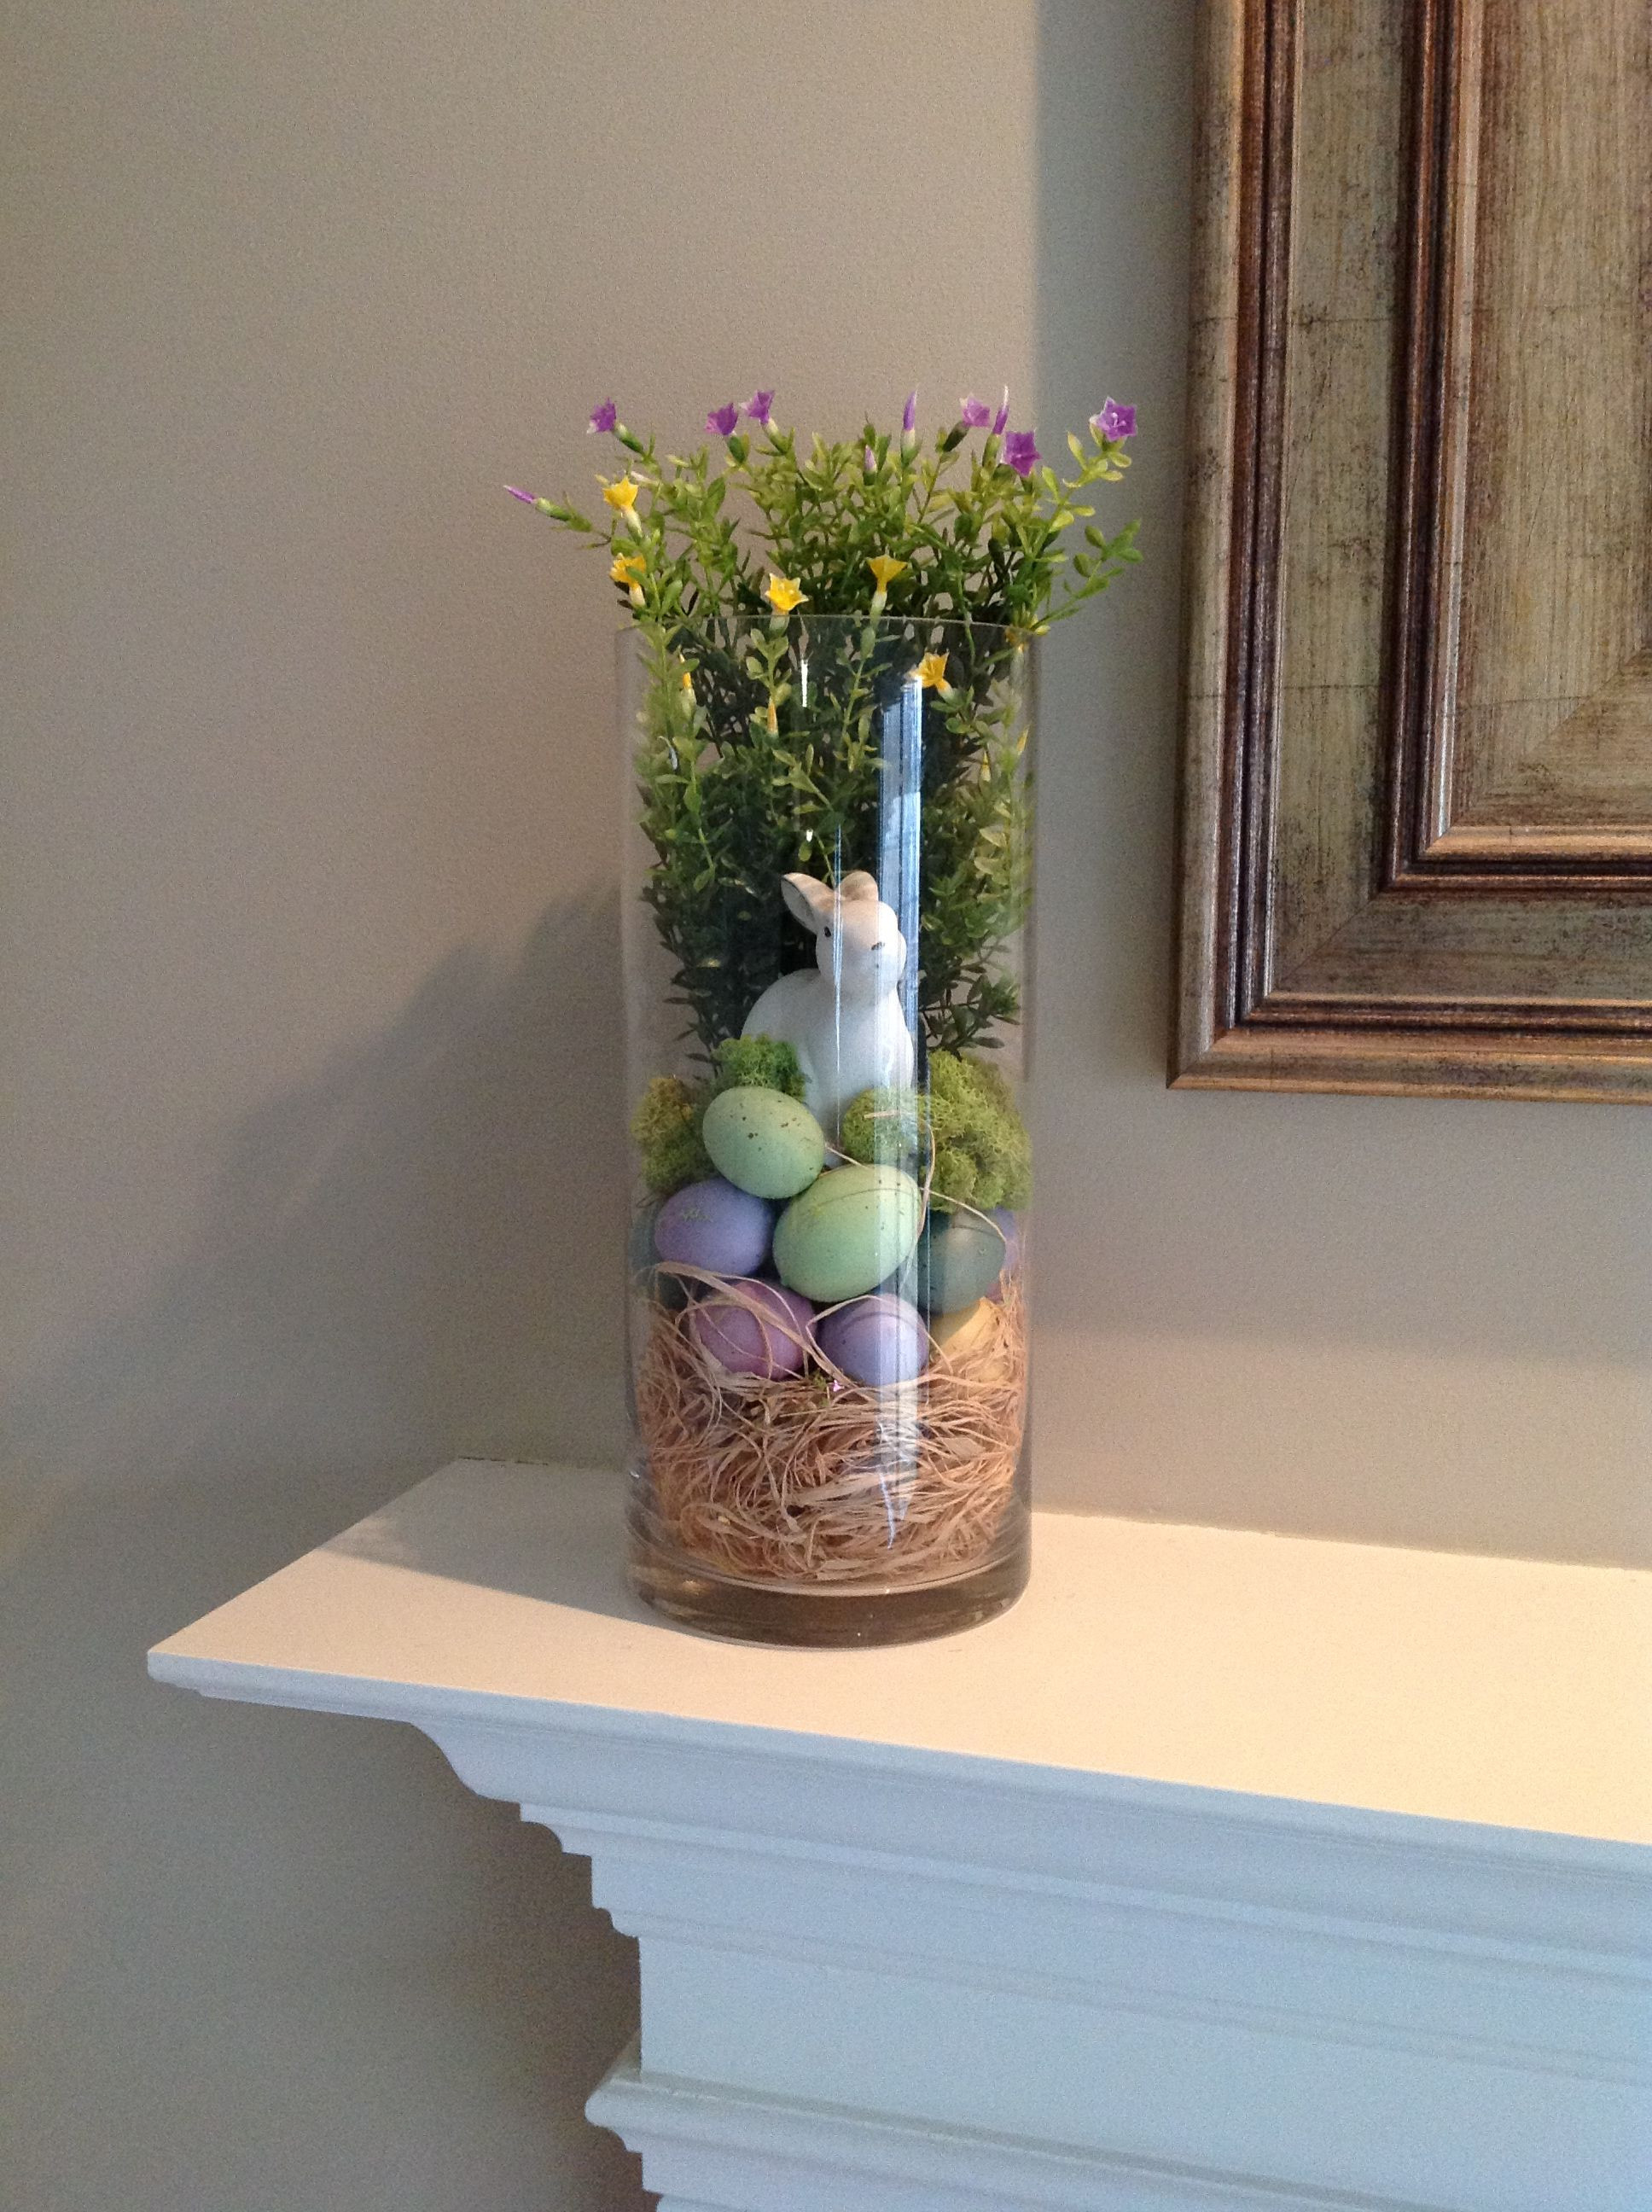 most expensive vase ever sold of hurricane glass vase filler for spring and easter on the mantel with hurricane glass vase filler for spring and easter on the mantel lori lubker pin easter hurricane rabbit